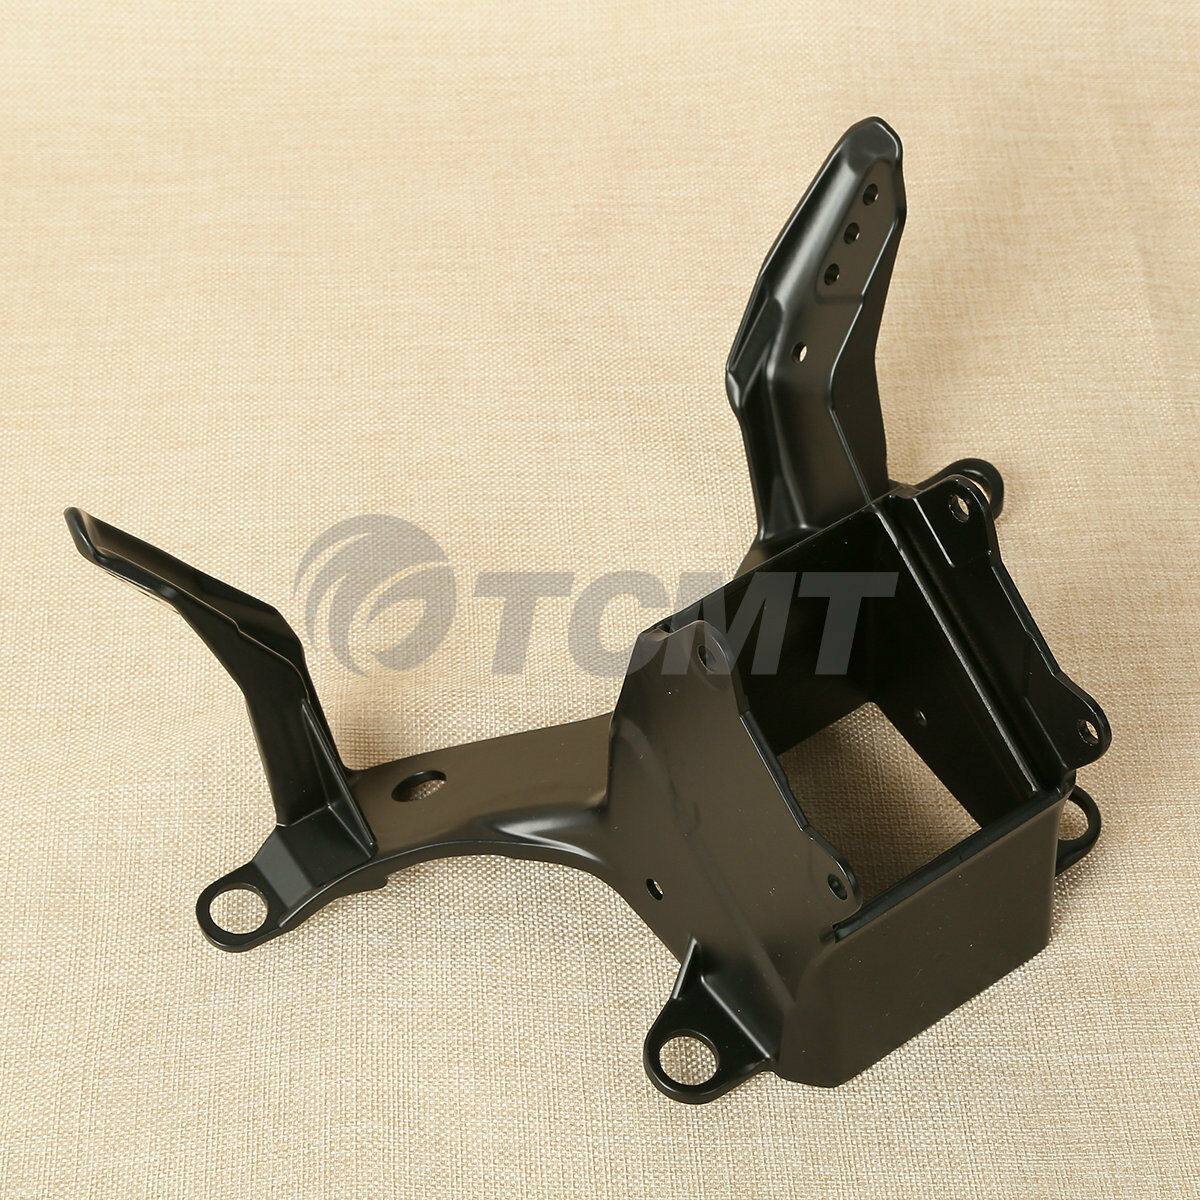 Upper Fairing Stay Bracket For YAMAHA YZF R6 YZFR6 2008-2016 10 11 12 13 14 15 - Moto Life Products